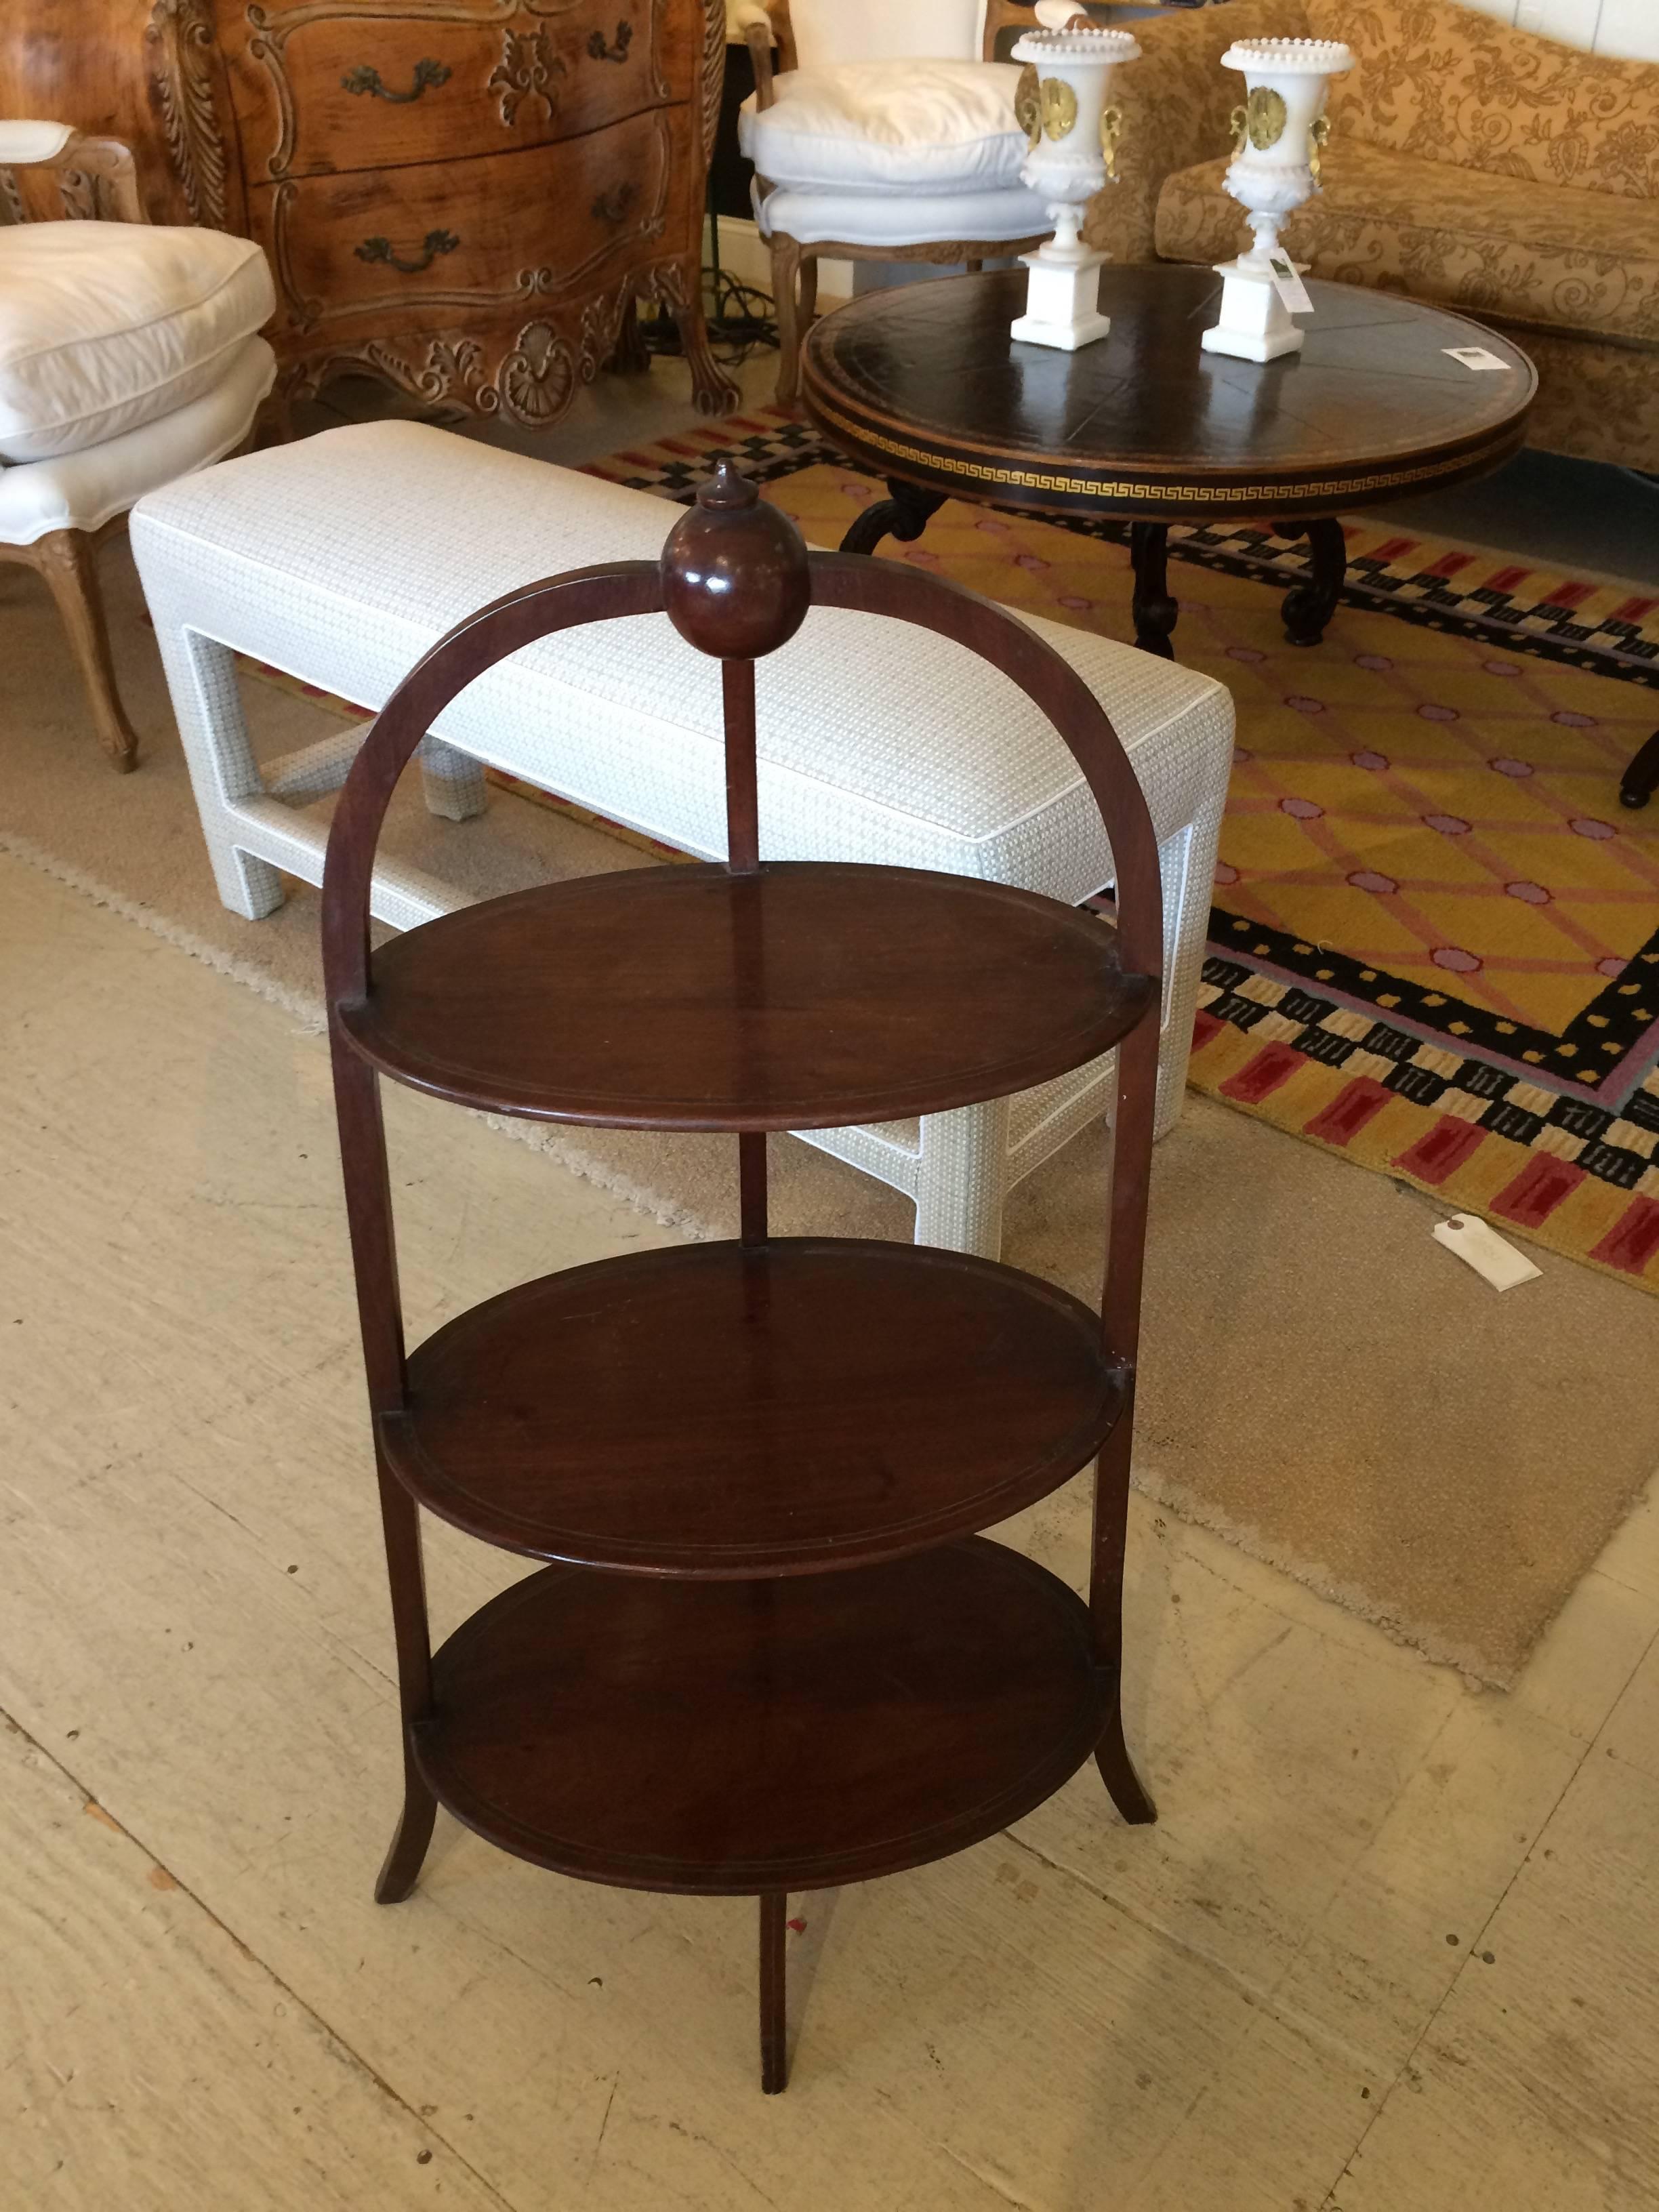 Rare 19th Century English Oval Three-Tier Side Table Muffin Stand For Sale 1